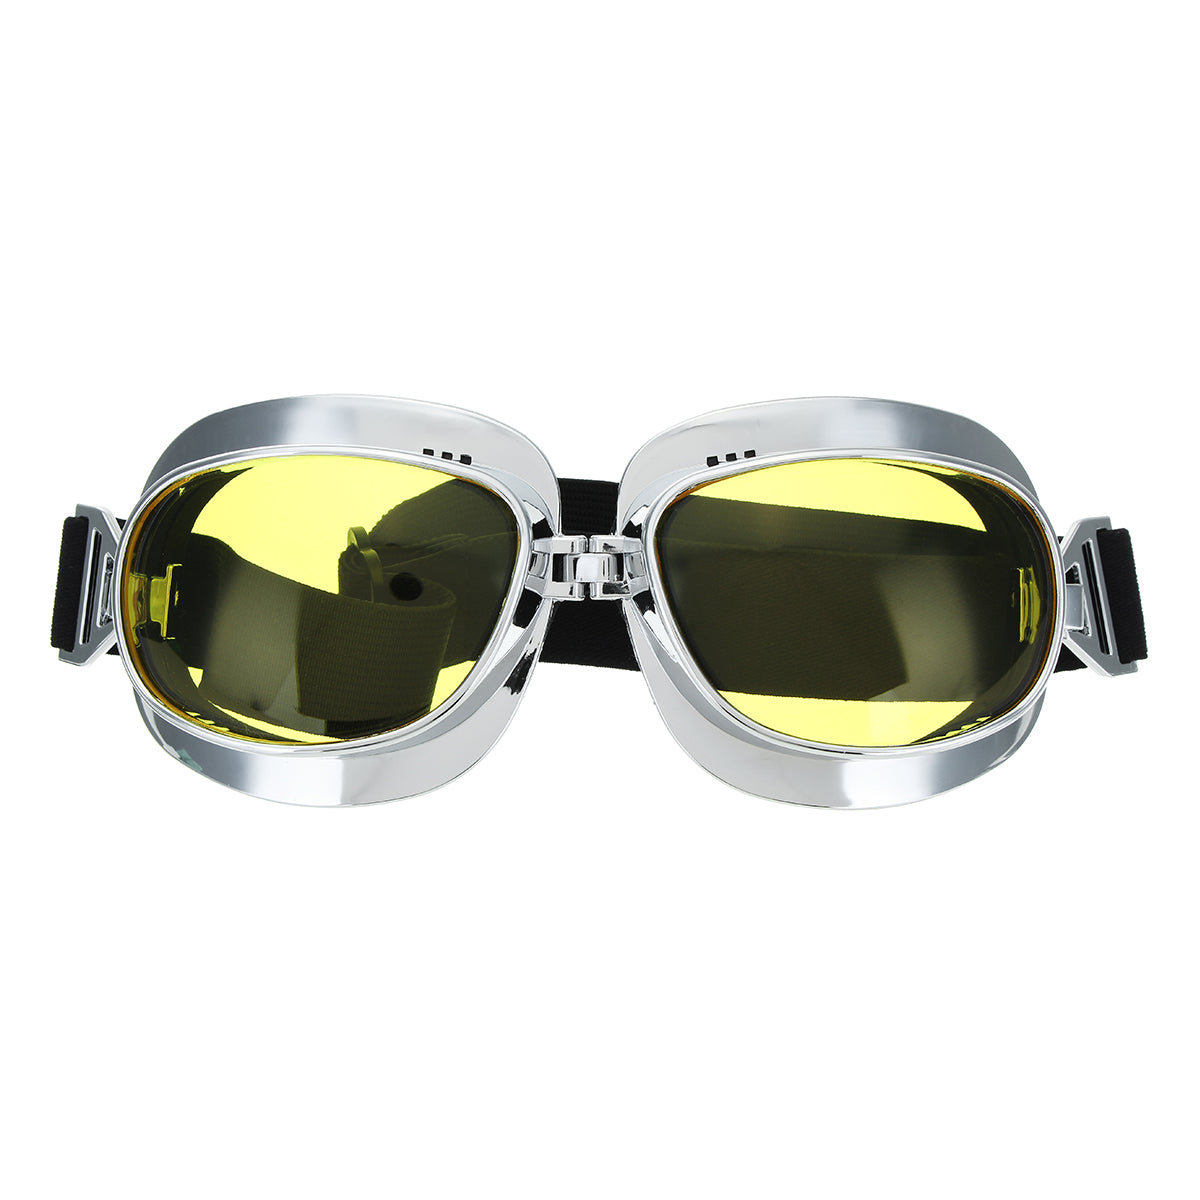 Dark Slate Gray Retro Motorcycle Goggles Vintage Windproof Riding Glasses Silver/Bronze Frame